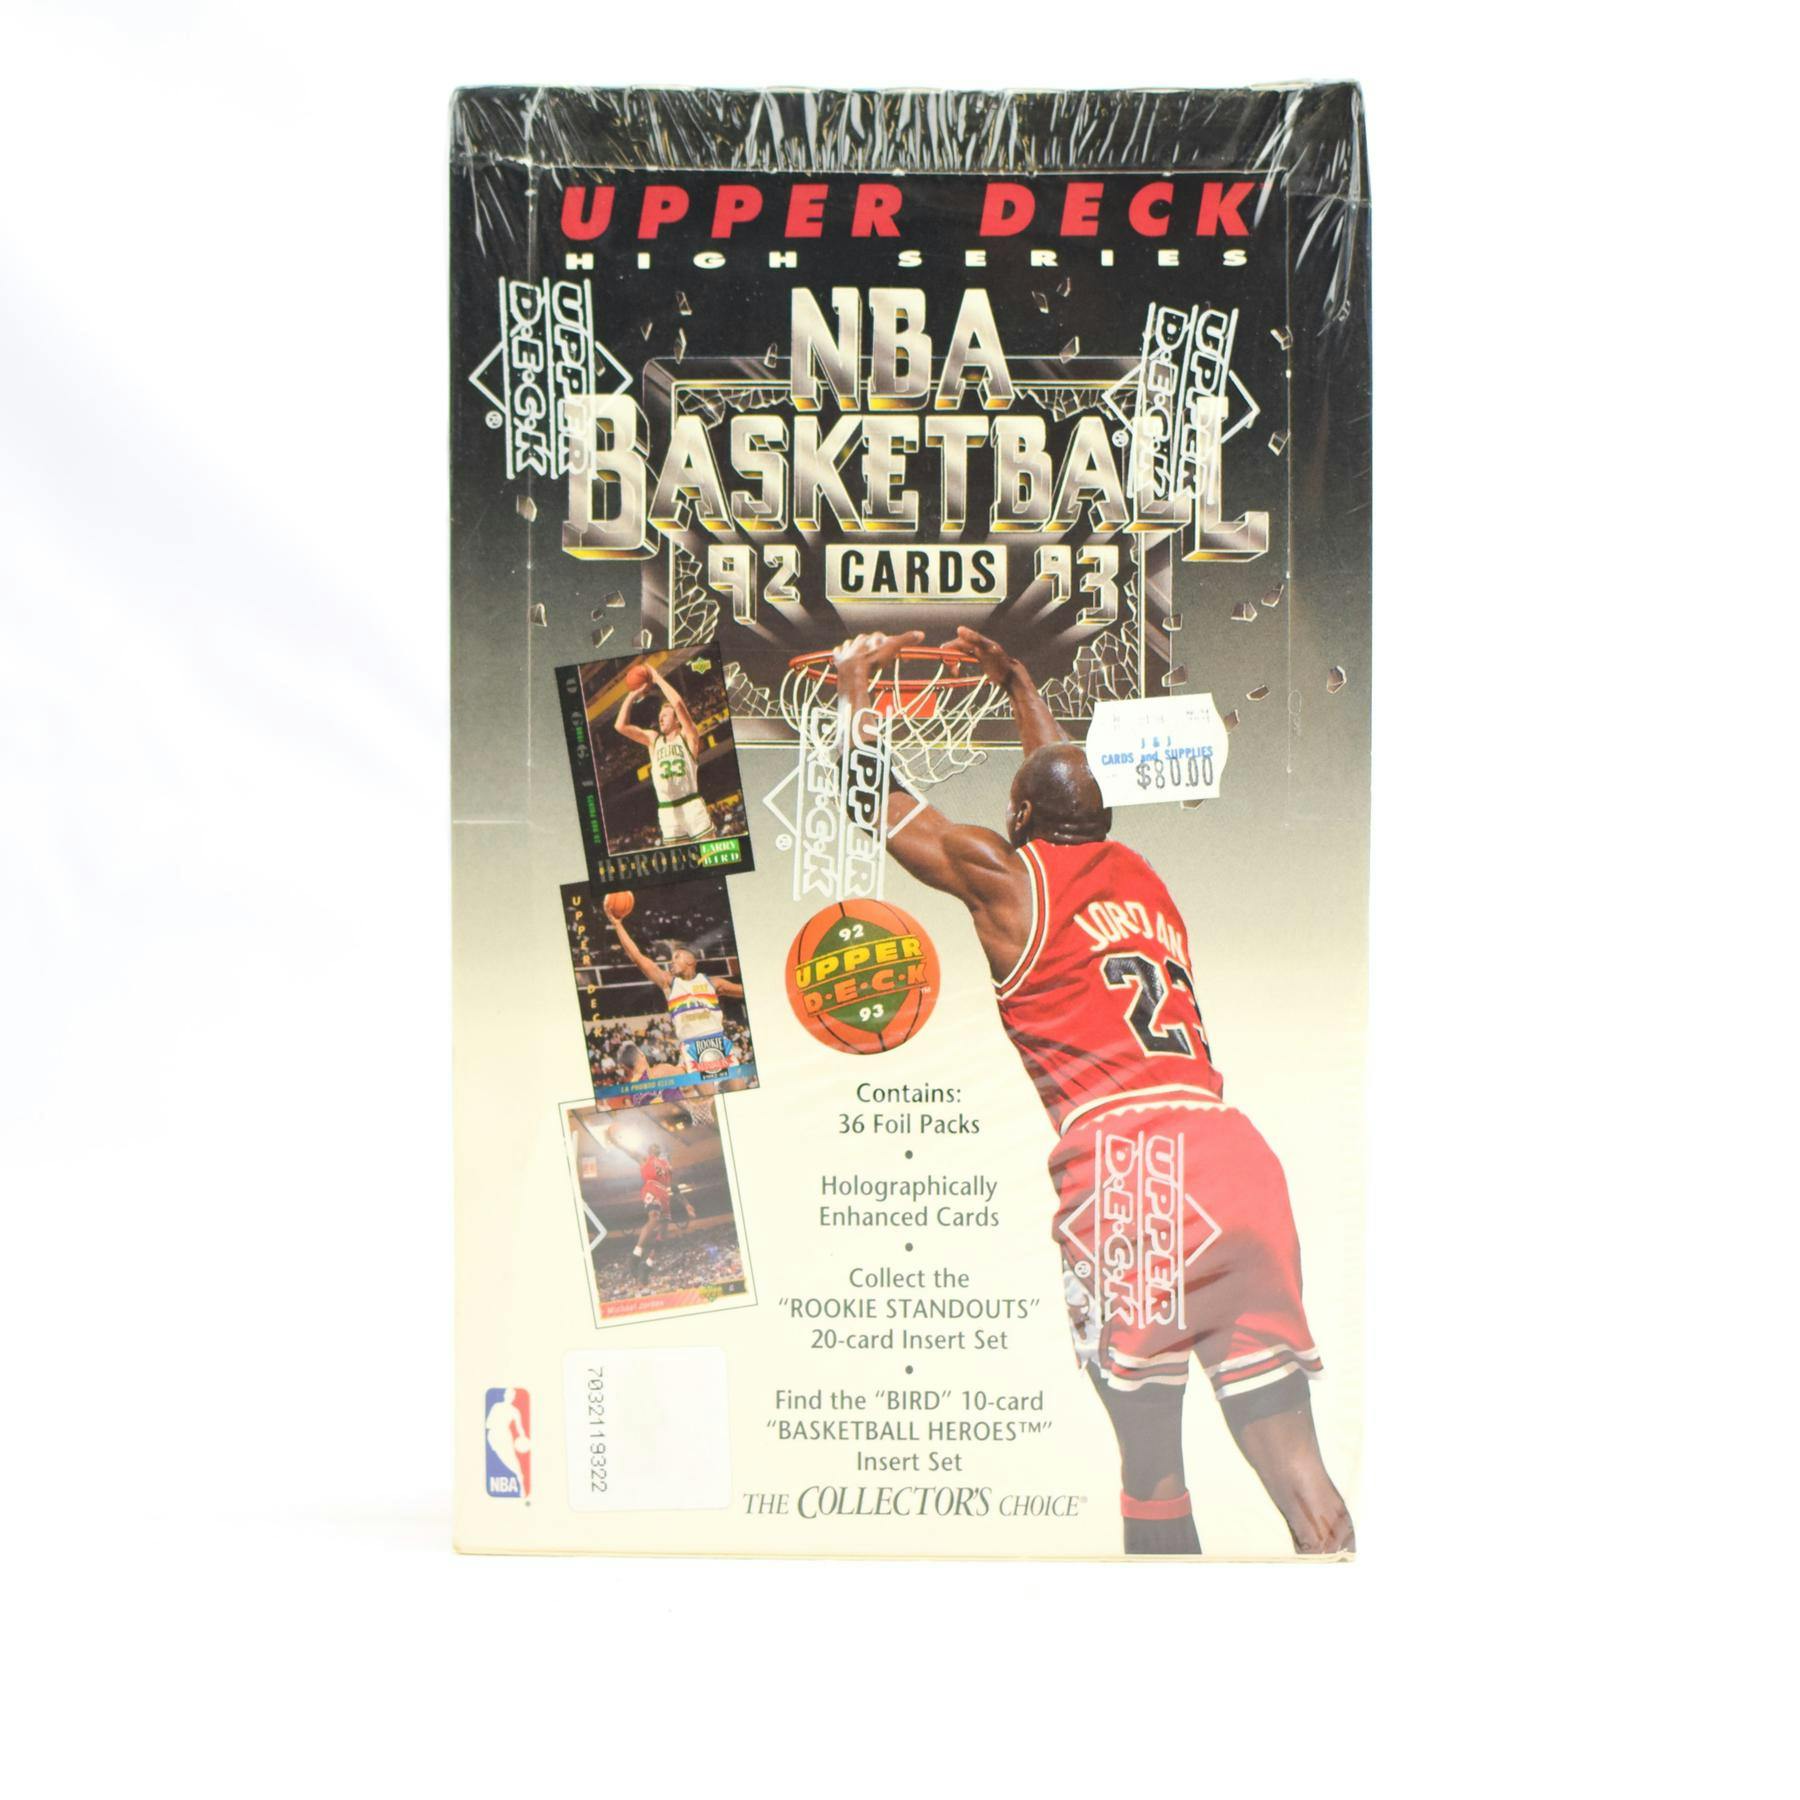 Topps 1992-93 Basketball Set Got Company Back in the Game